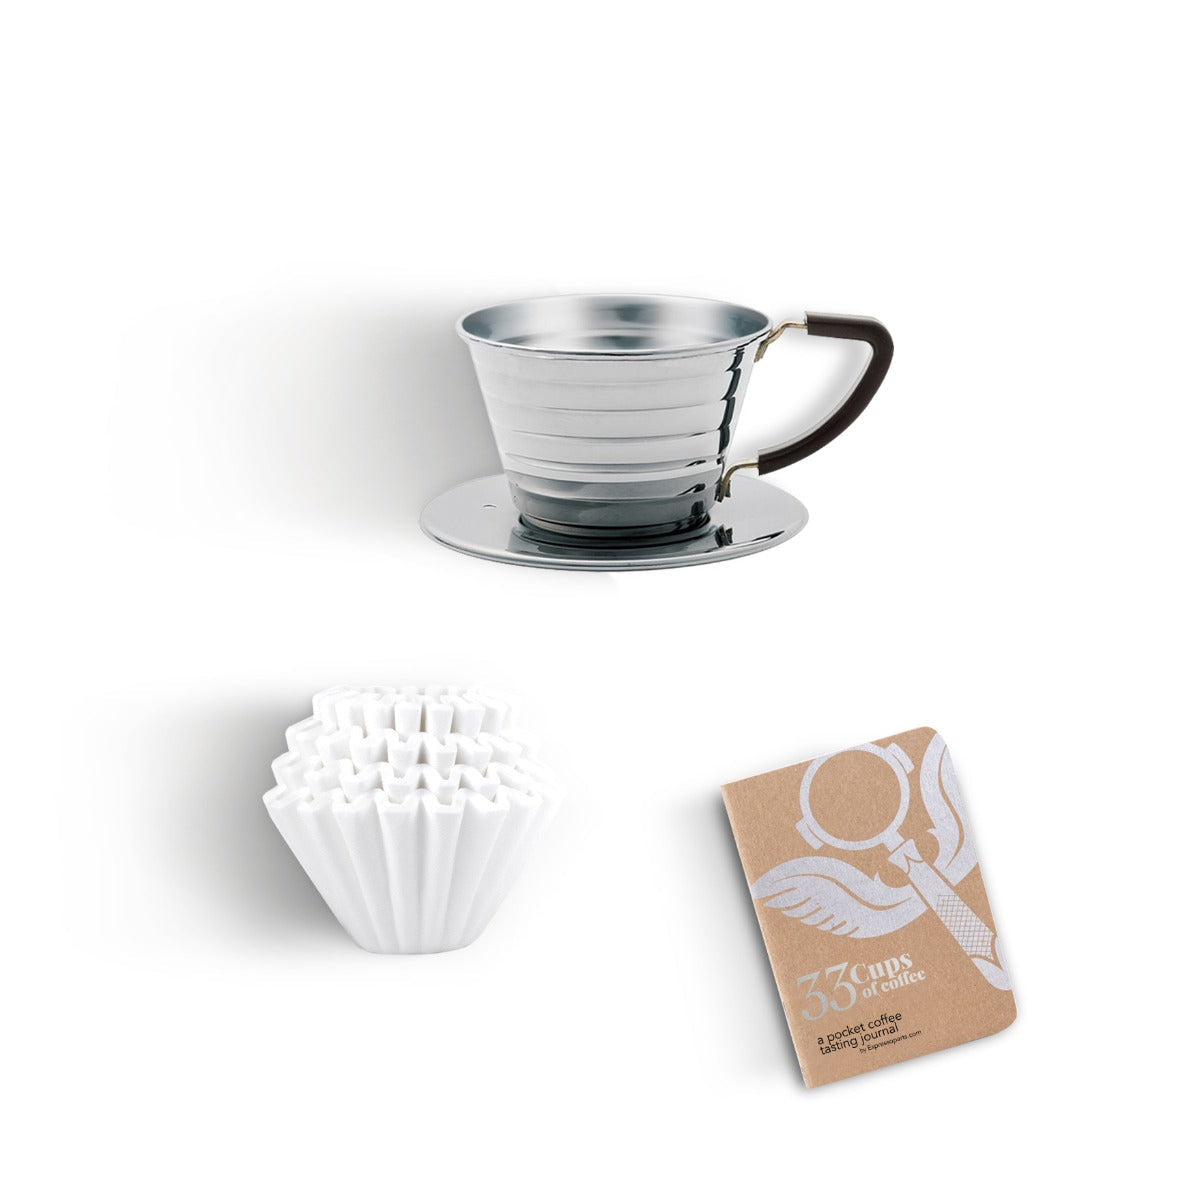 Kalita Wave 155 Basic Coffee Pour Over Kit - Stainless Steel